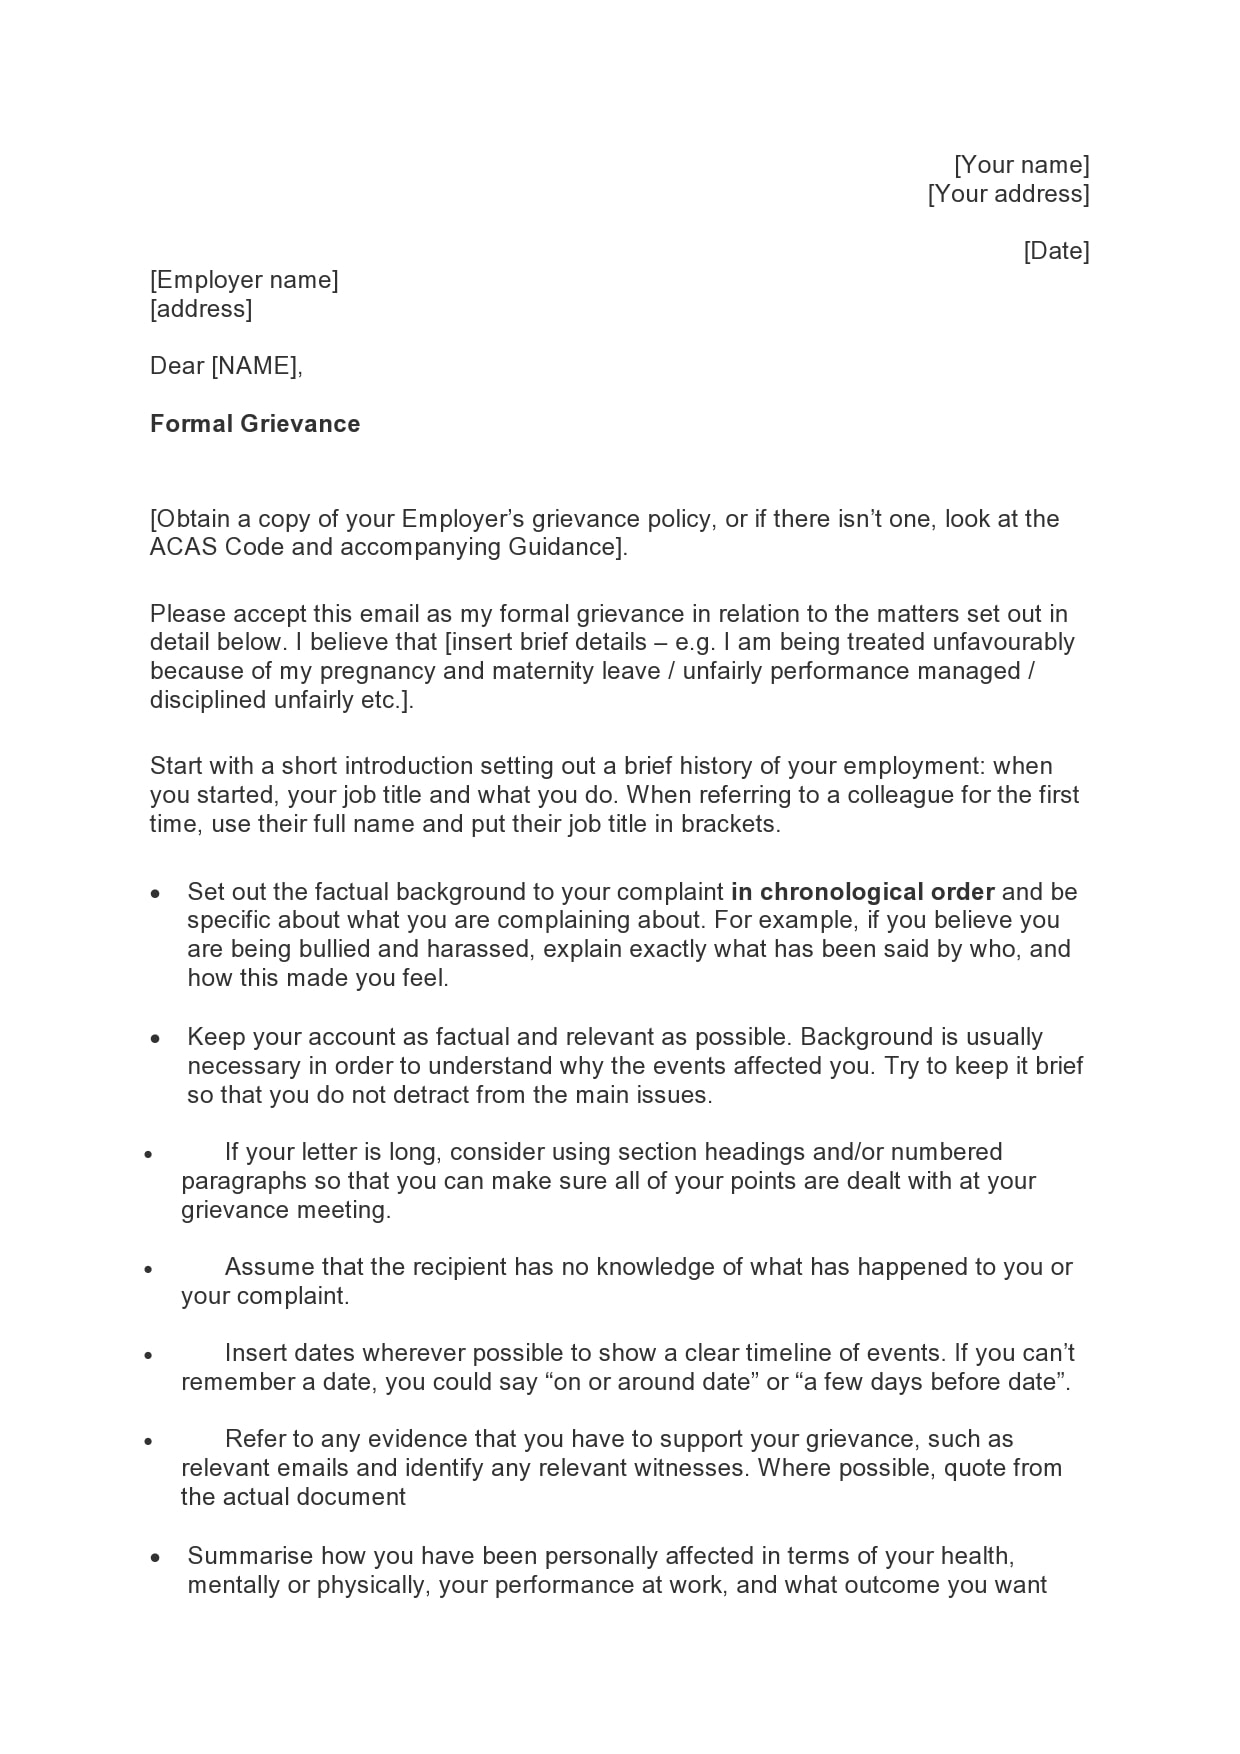 20 Formal Grievance Letter Templates (+Examples) In Formal Letter Of Complaint To Employer Template